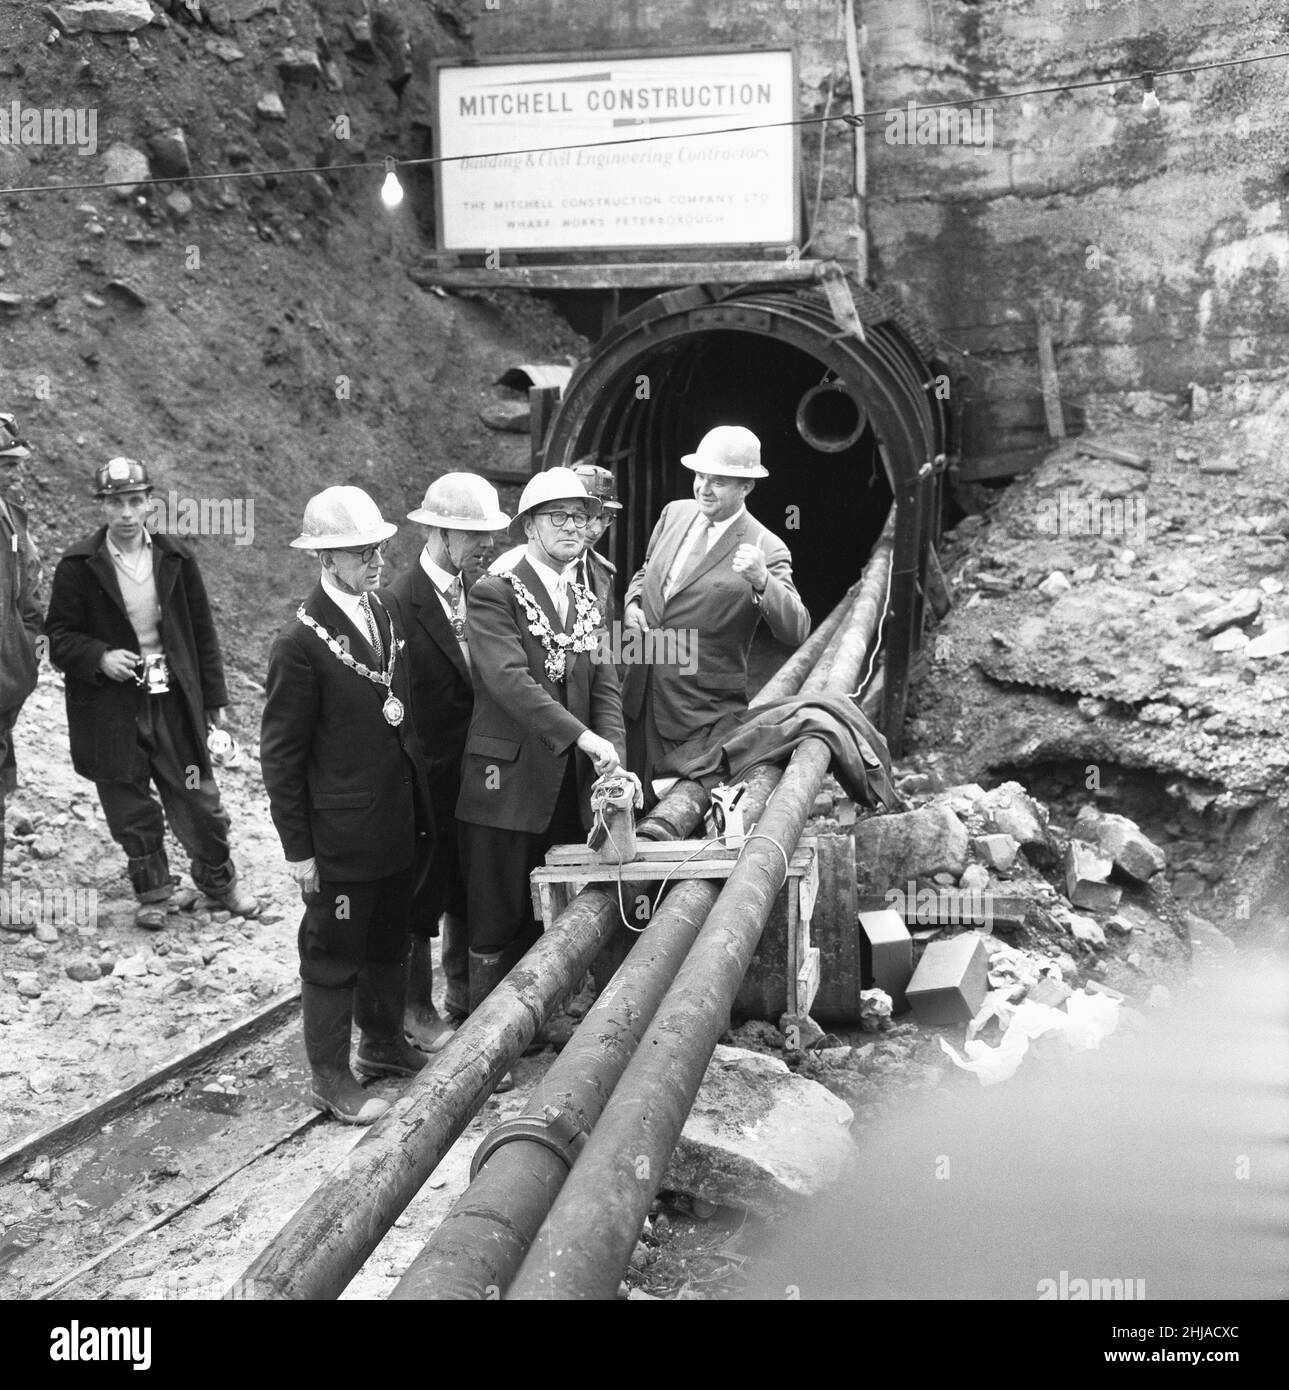 Cutting through 1,140 foot high Manshead Hill was completed when the Mayor of Wakefield, Alderman Nathan Hutchinson J.P. fired the two final charges to complete the tunnel. 24 men have worked day and night cutting the tunnel, 8000 feet long, often waist deep in water, The conditions have been most difficult, but the men cheered as they were congratulated by the Mayor. The bogy which took him 4,000 feet into the tunnel came off the track on the return journey, so Mr Hutchinson had to splash through the water which flowed through the tunnel. The tunnel will ensure adequate water supplies to peop Stock Photo